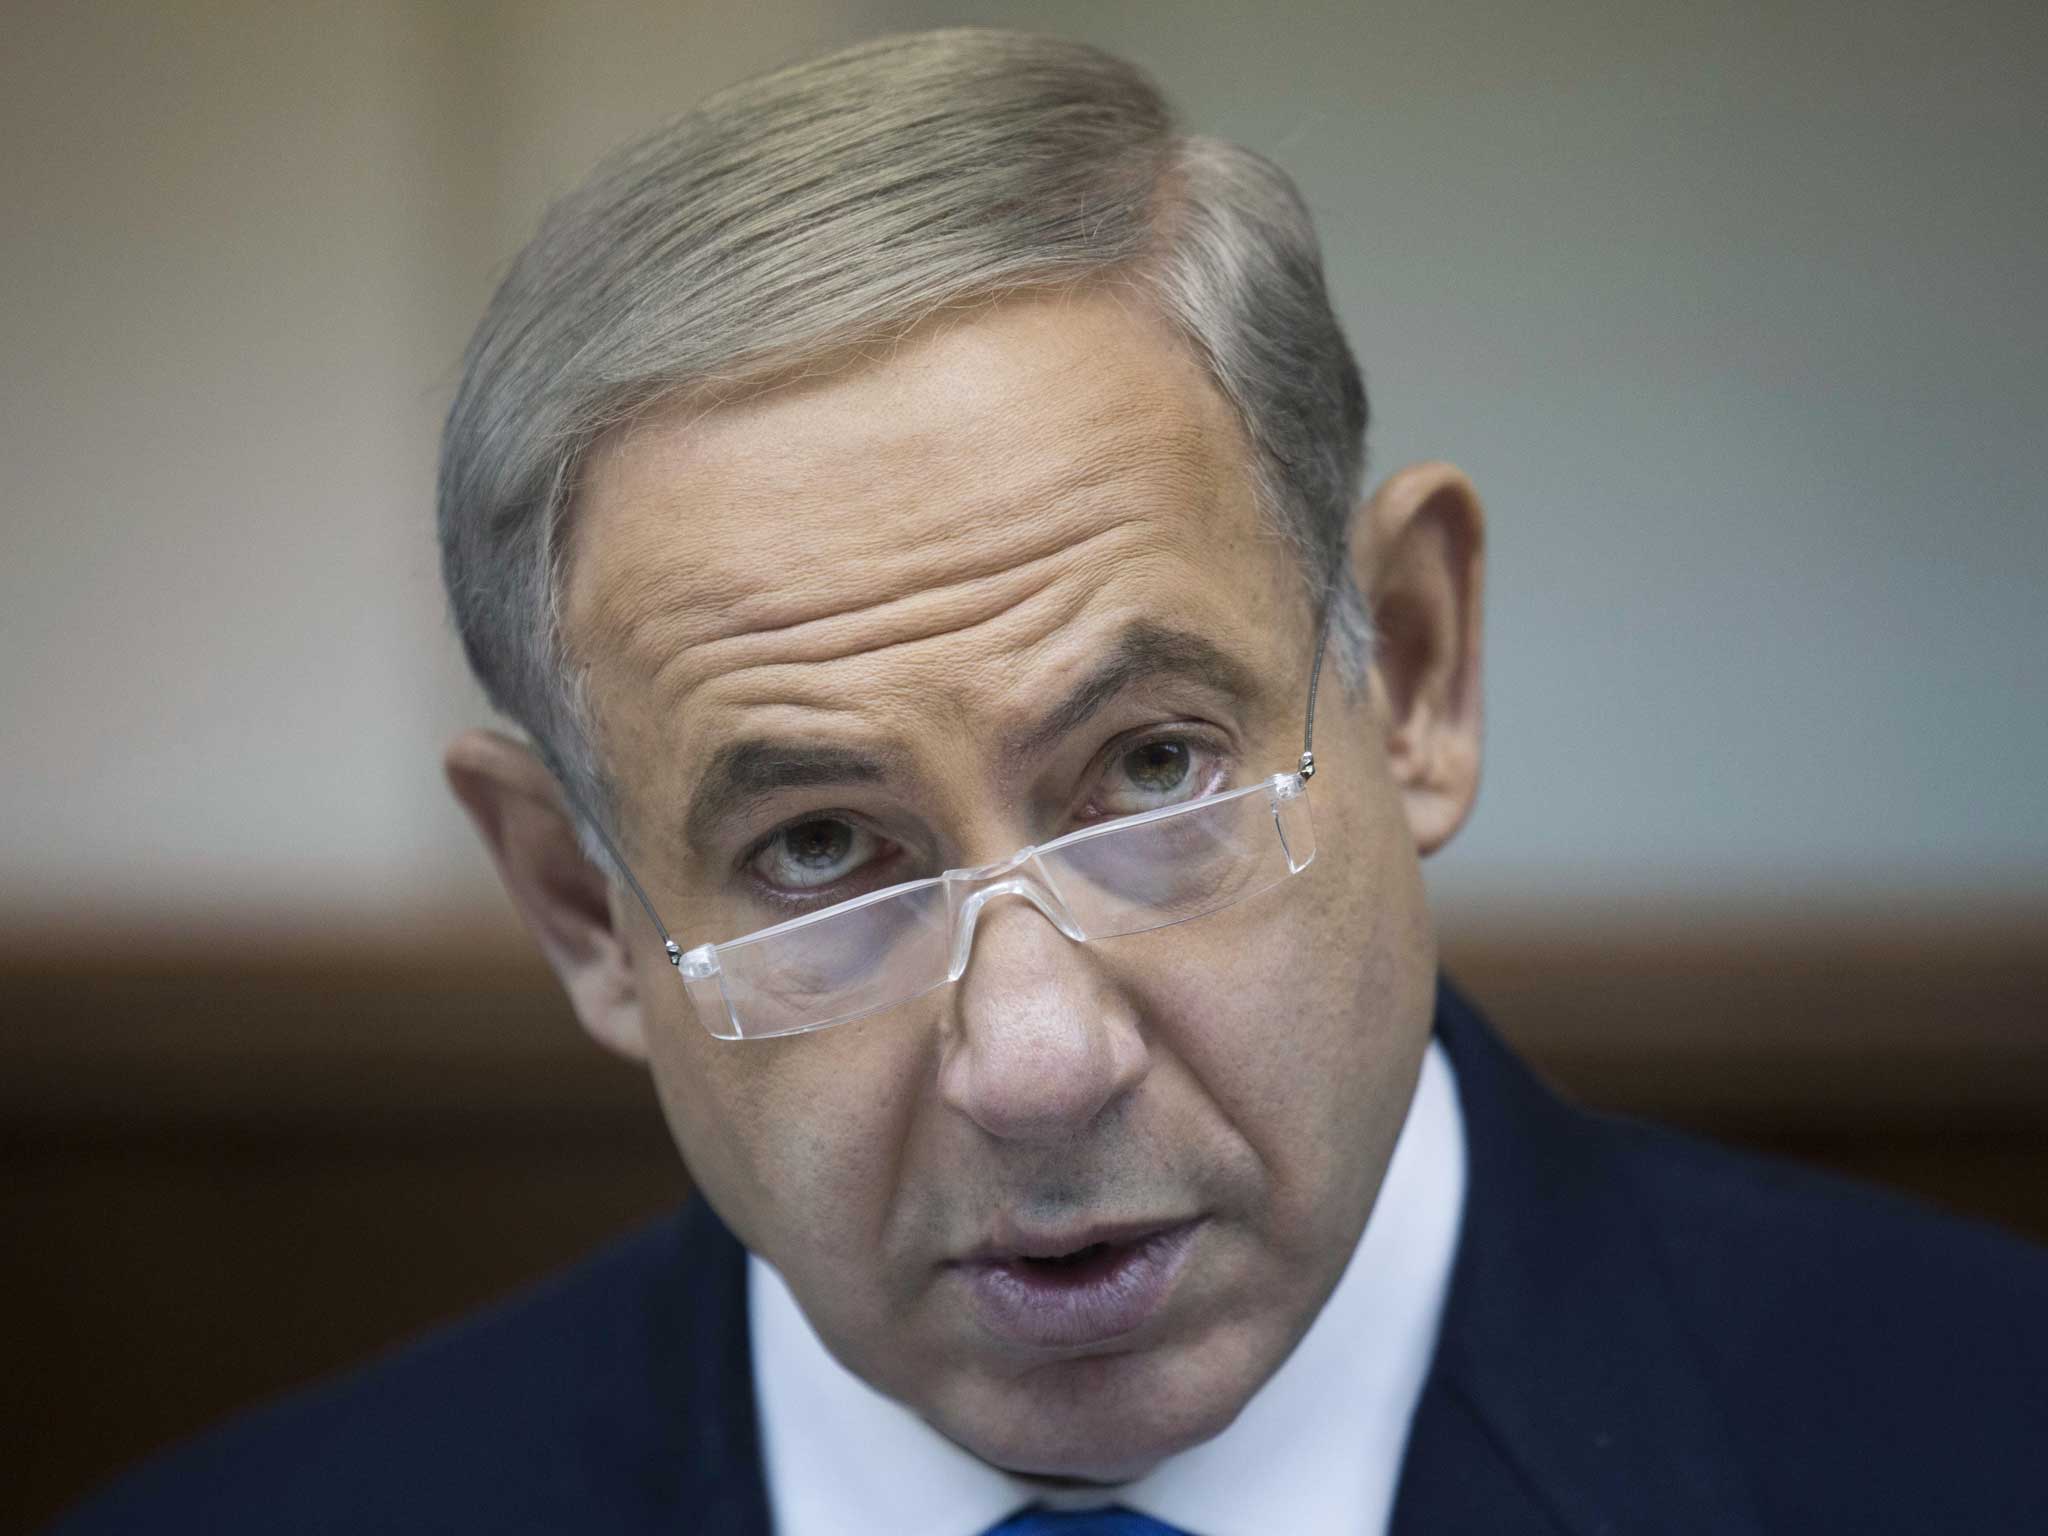 Benjamin Netanyahu said Iran could be ready to produce a bomb within weeks